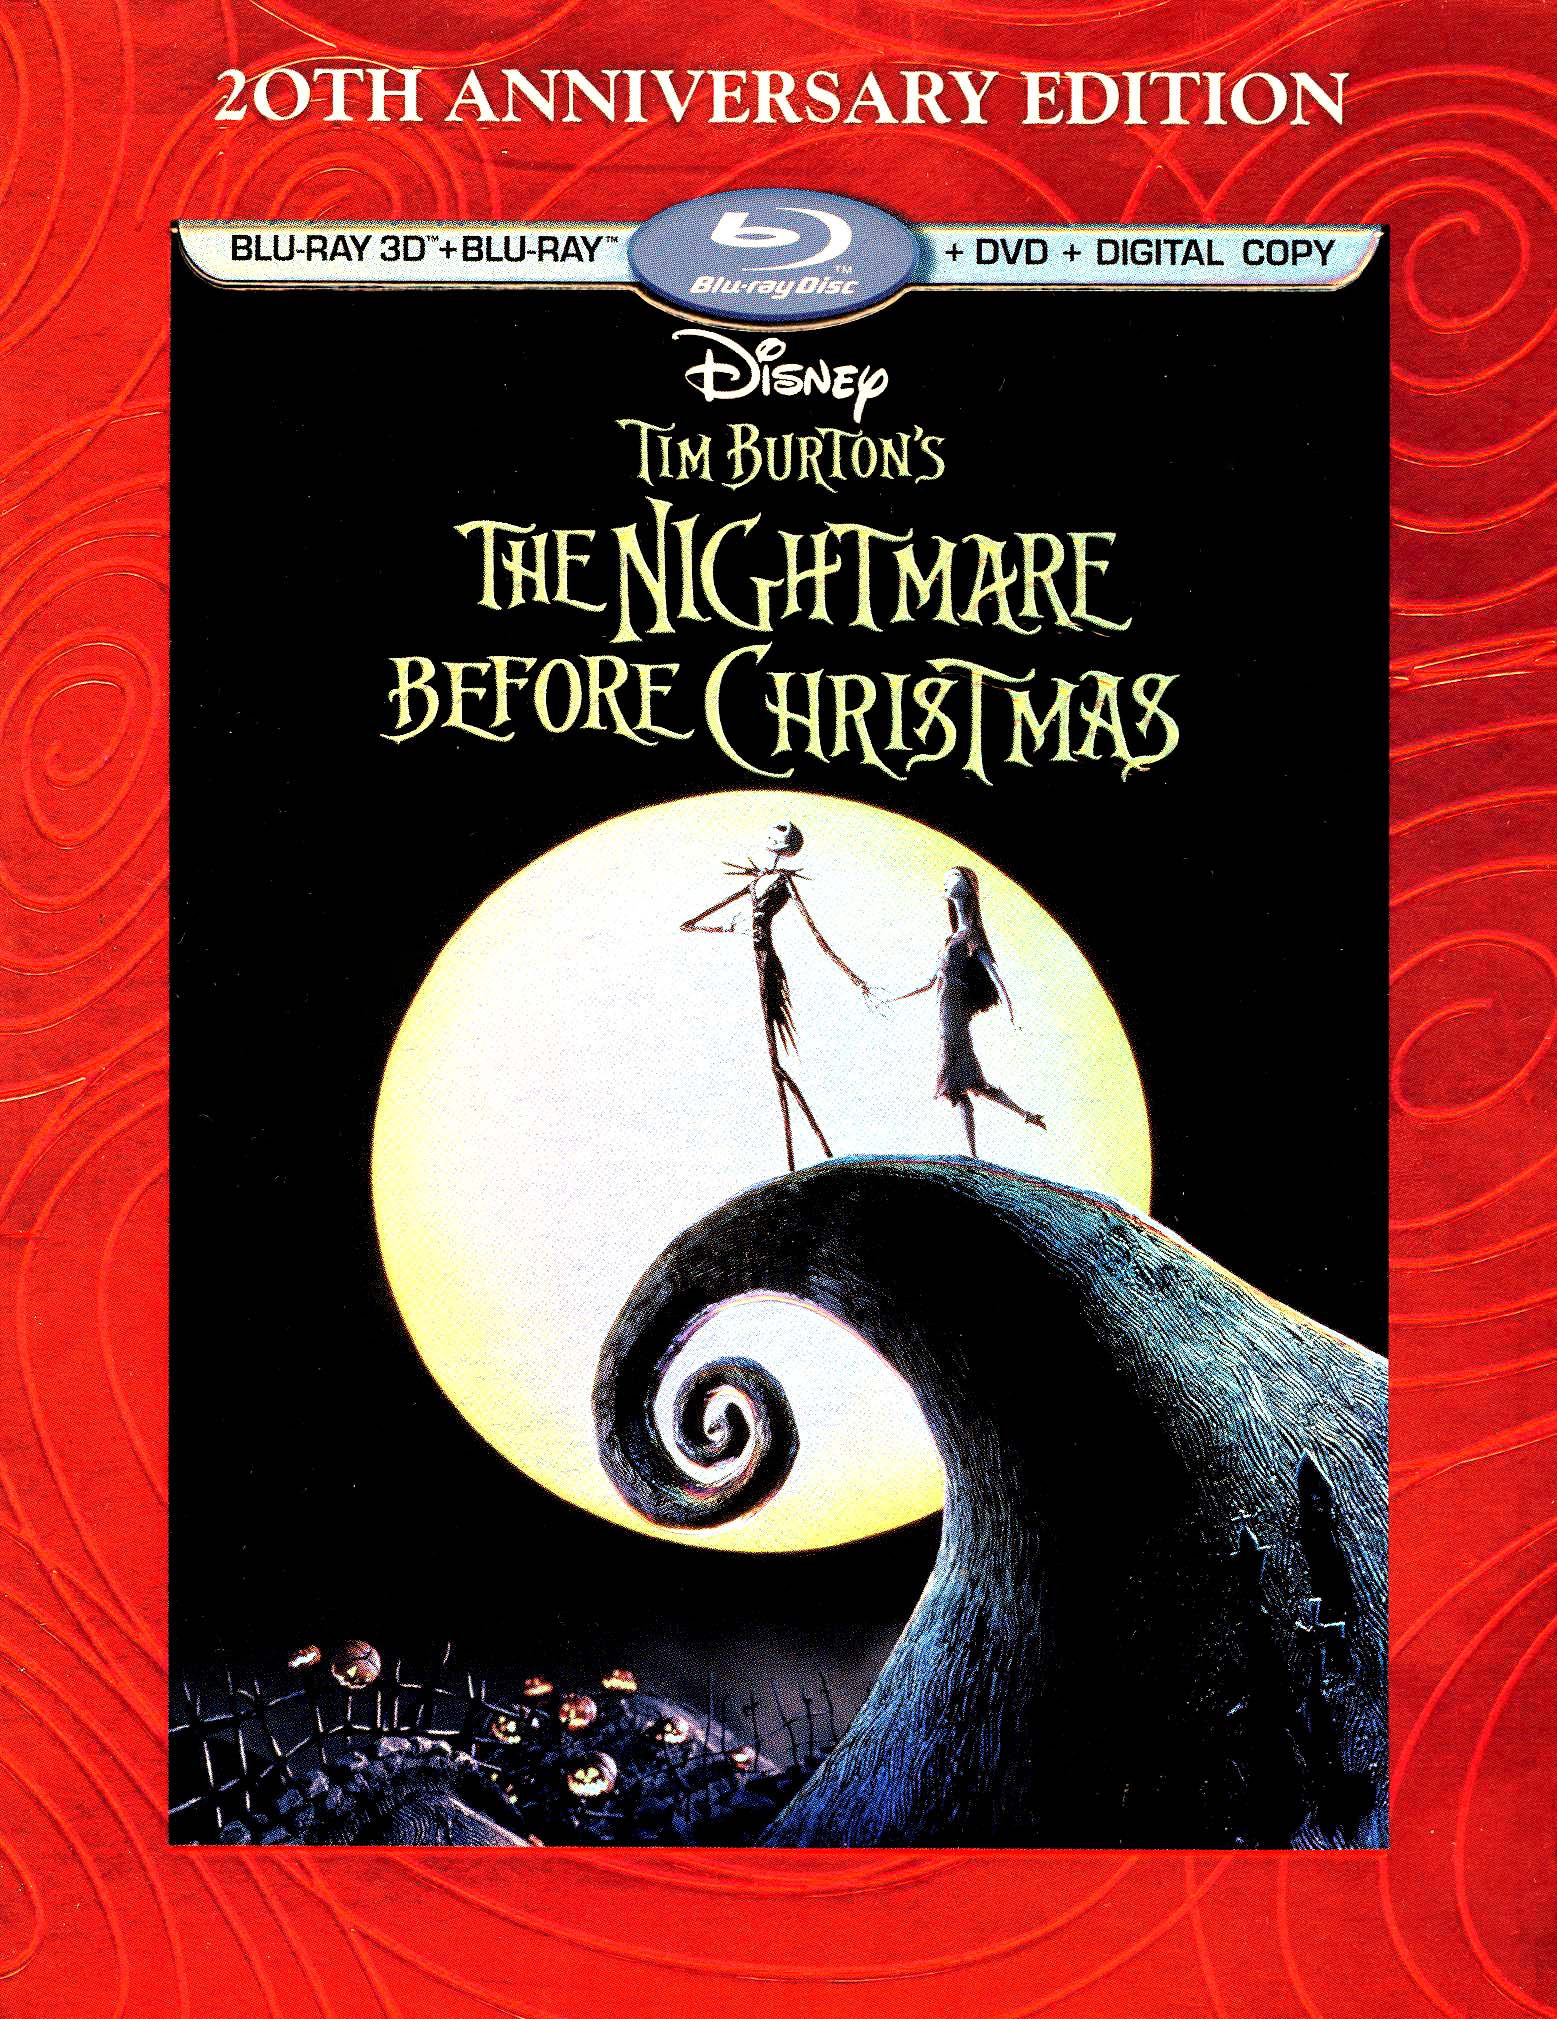 The Nightmare Before Christmas Digitally Remastered for DVD and BluRay